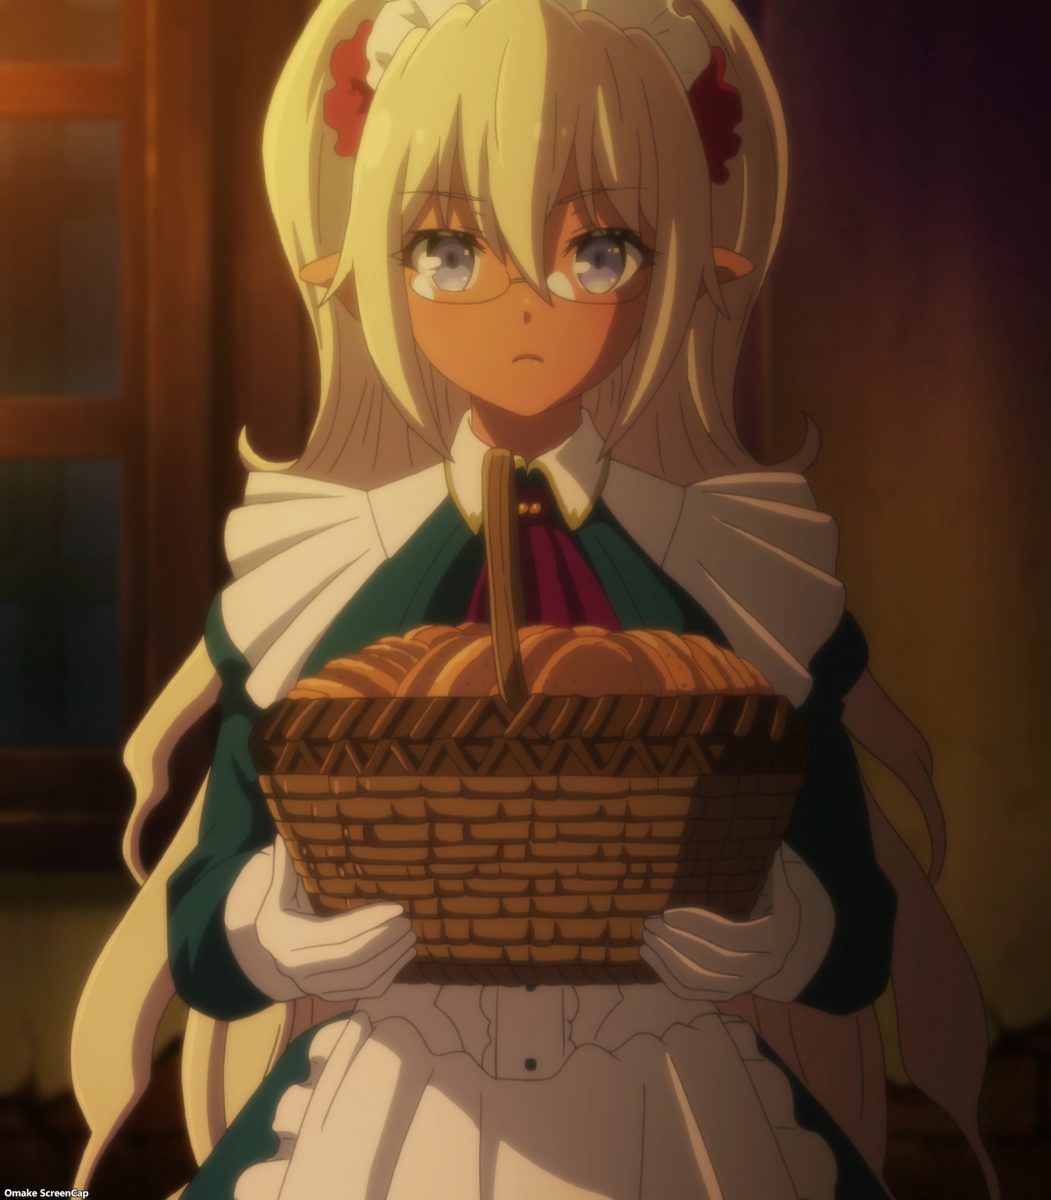 Isekai Maou S2 Episode 1 Edelgard Maid Carries Basket Of Biscuits